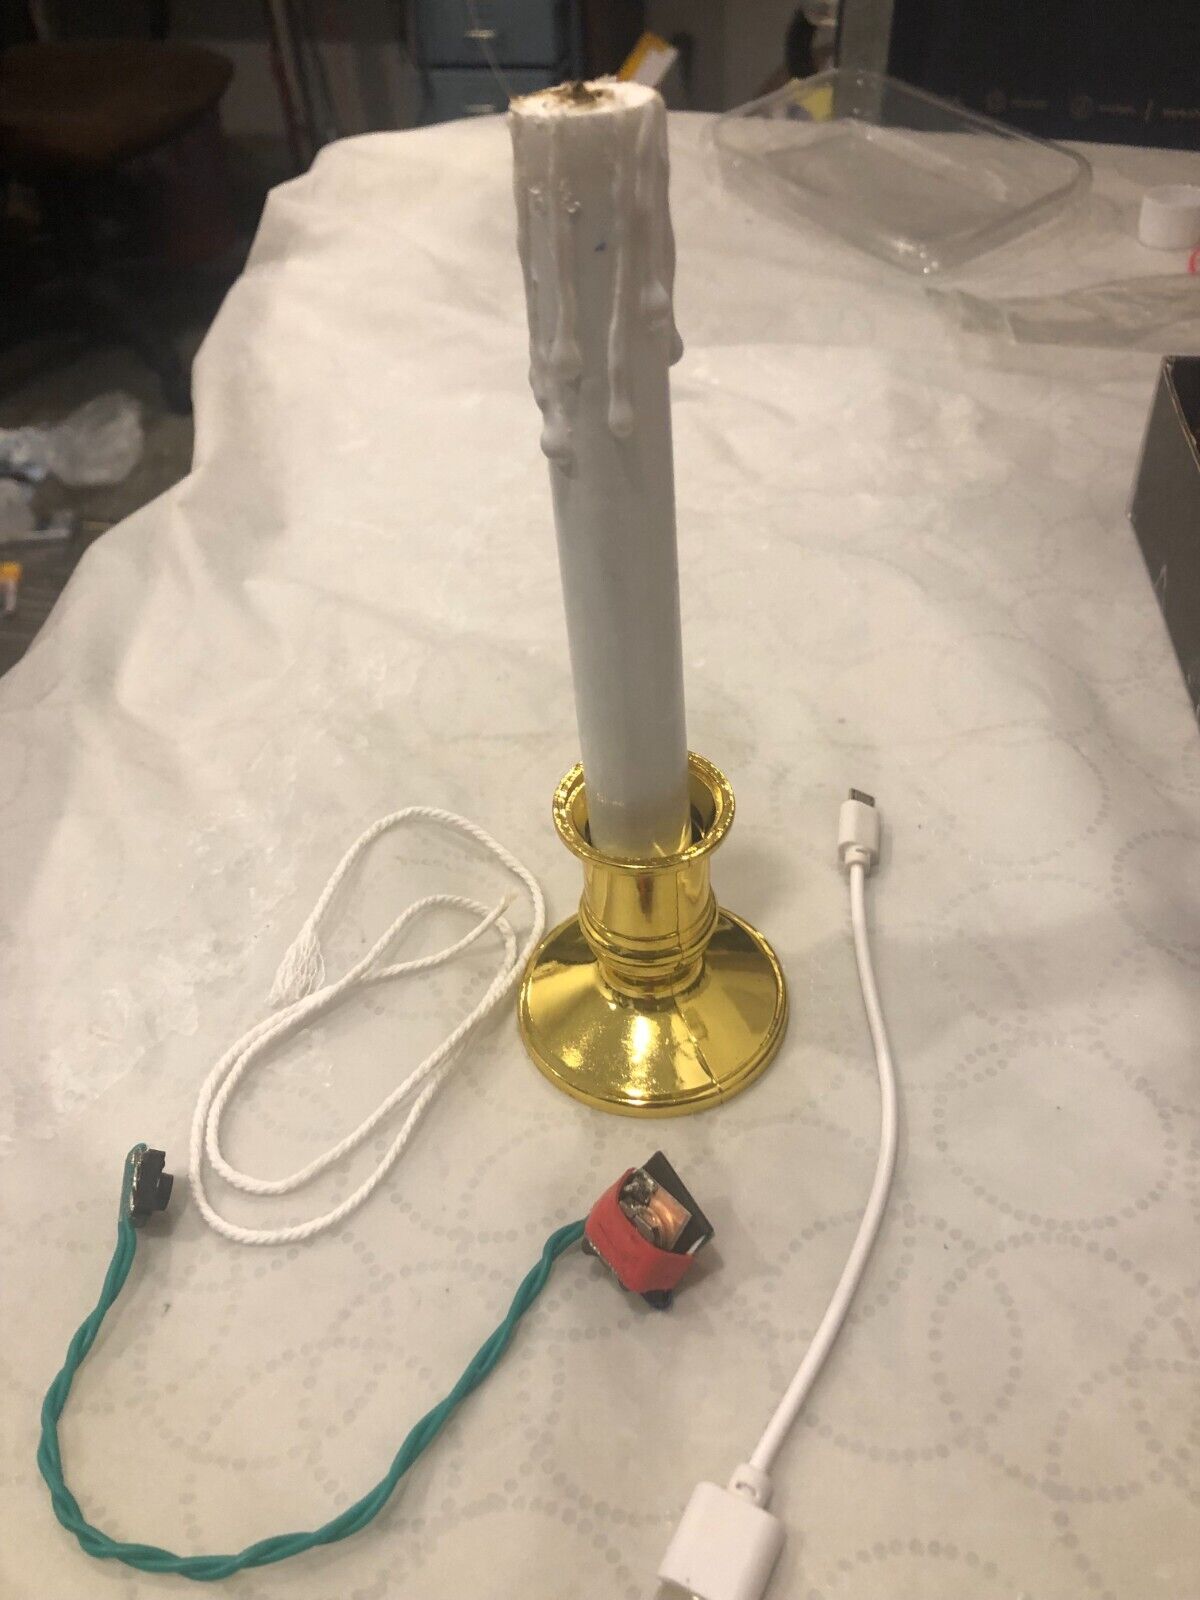 Remote control candle (with spark ignition), upgrade